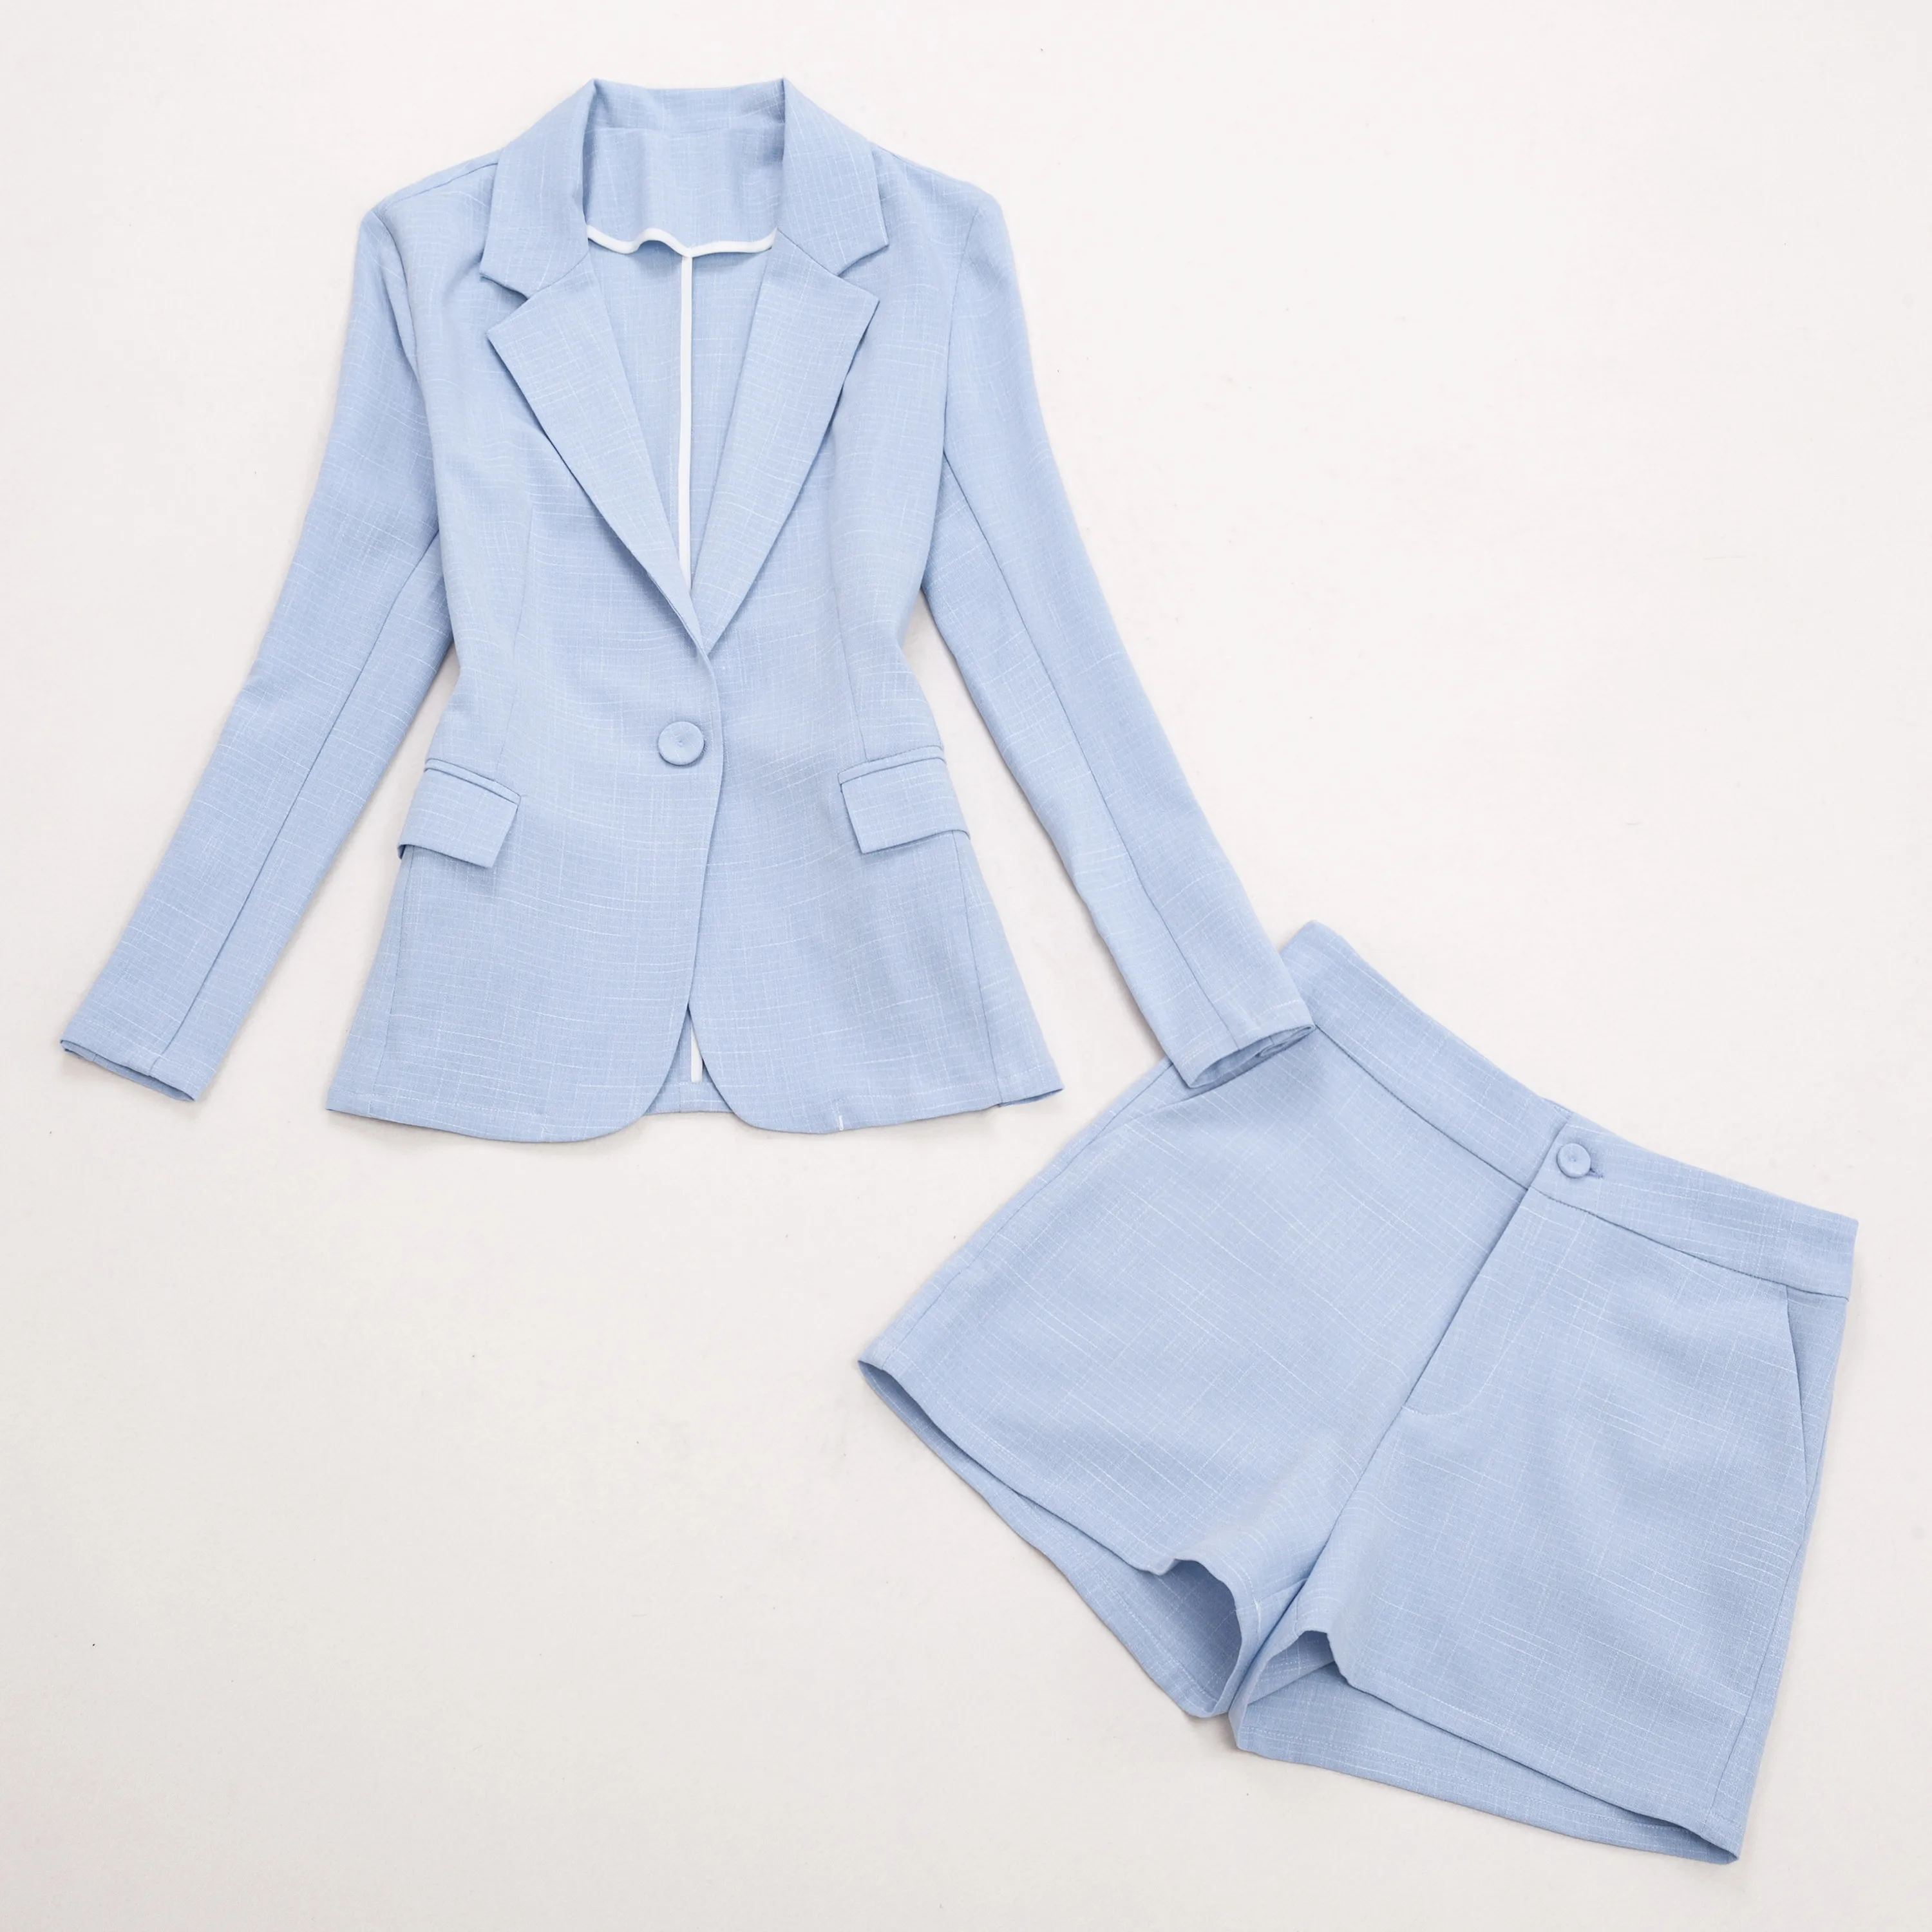 2022 New Summer Women's Suit Shorts 2-piece Set Solid Color Long Sleeve Thin Linen Slim Fit Ladies Jacket High Waist Shorts